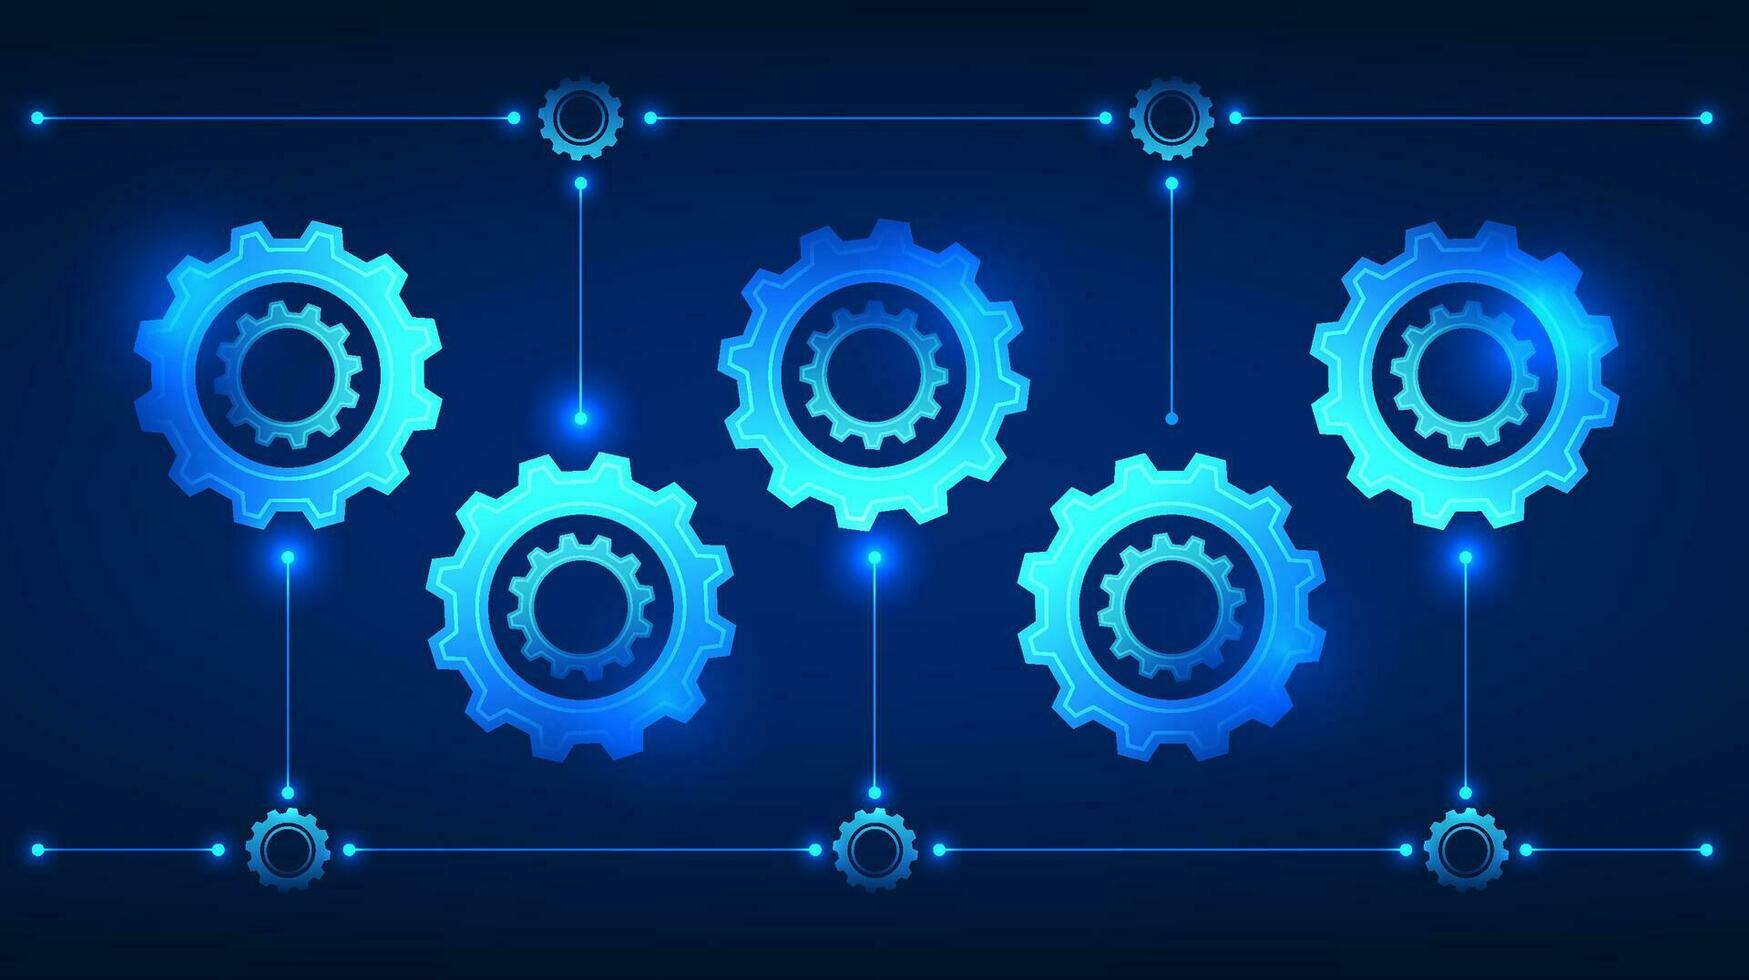 Gear technology illustration set of multiple gears with connected lines. It conveys the drive for technology to develop, to work together to help think and work in order to achieve the desired goals. vector